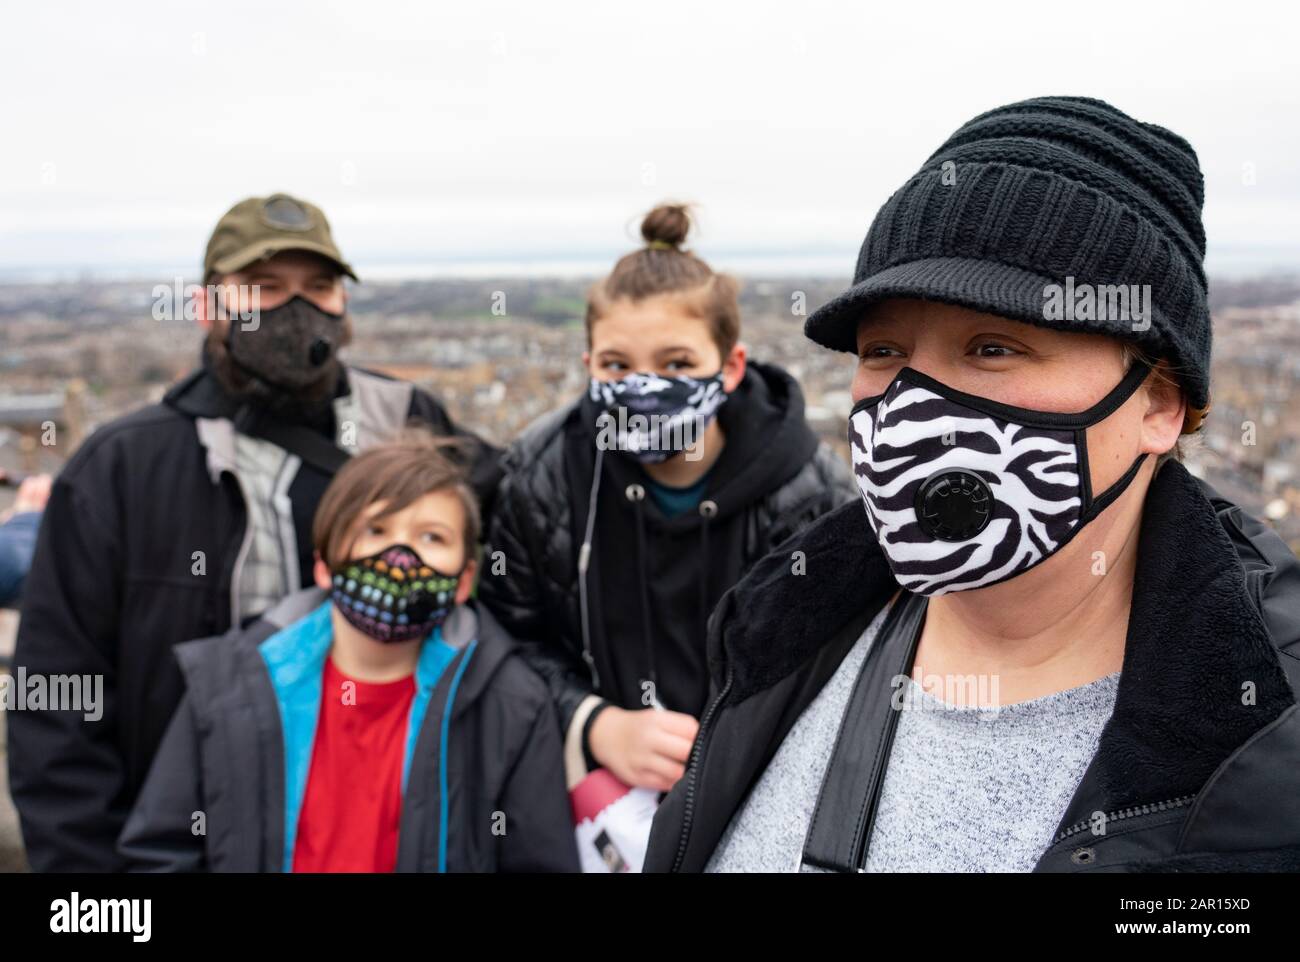 Edinburgh, Scotland, UK. 25 January 2020. American tourists from Missouri wear face masks on visit to Edinburgh Castle today. They want to take extra precautions when in public during to the occurrence of the Coronavirus in Scotland in recent days. Iain Masterton/Alamy Live News Stock Photo